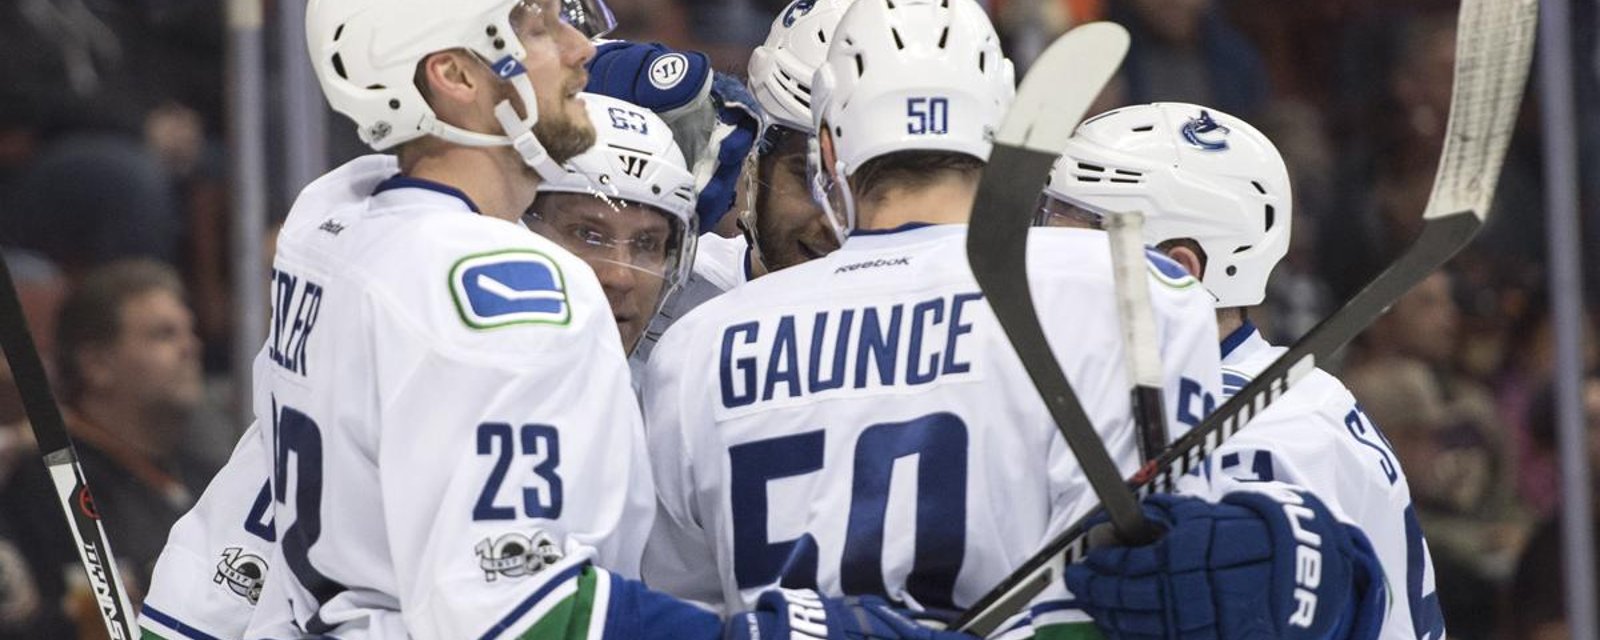 Canucks hit by biology yet again!